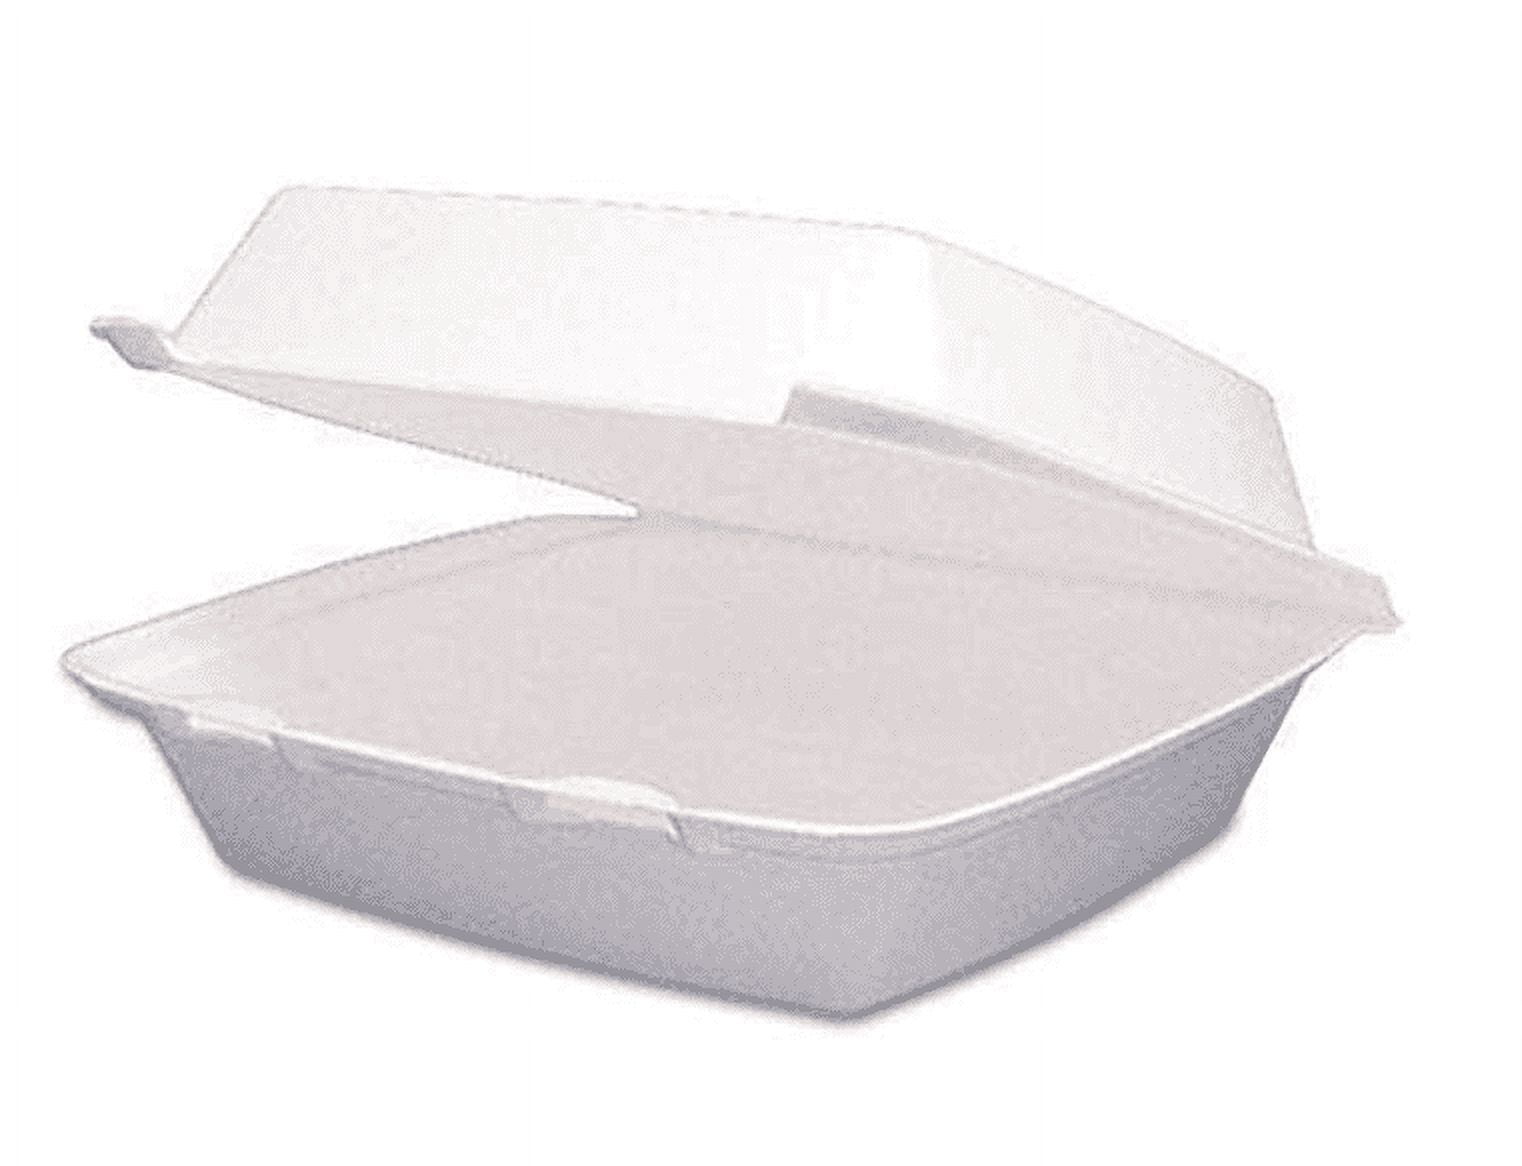 Dart Foam Hinged Lid Containers, 1-Compartment, 8.38 x 7.78 x 3.25, White,  200/Carton -DCC85HT1R